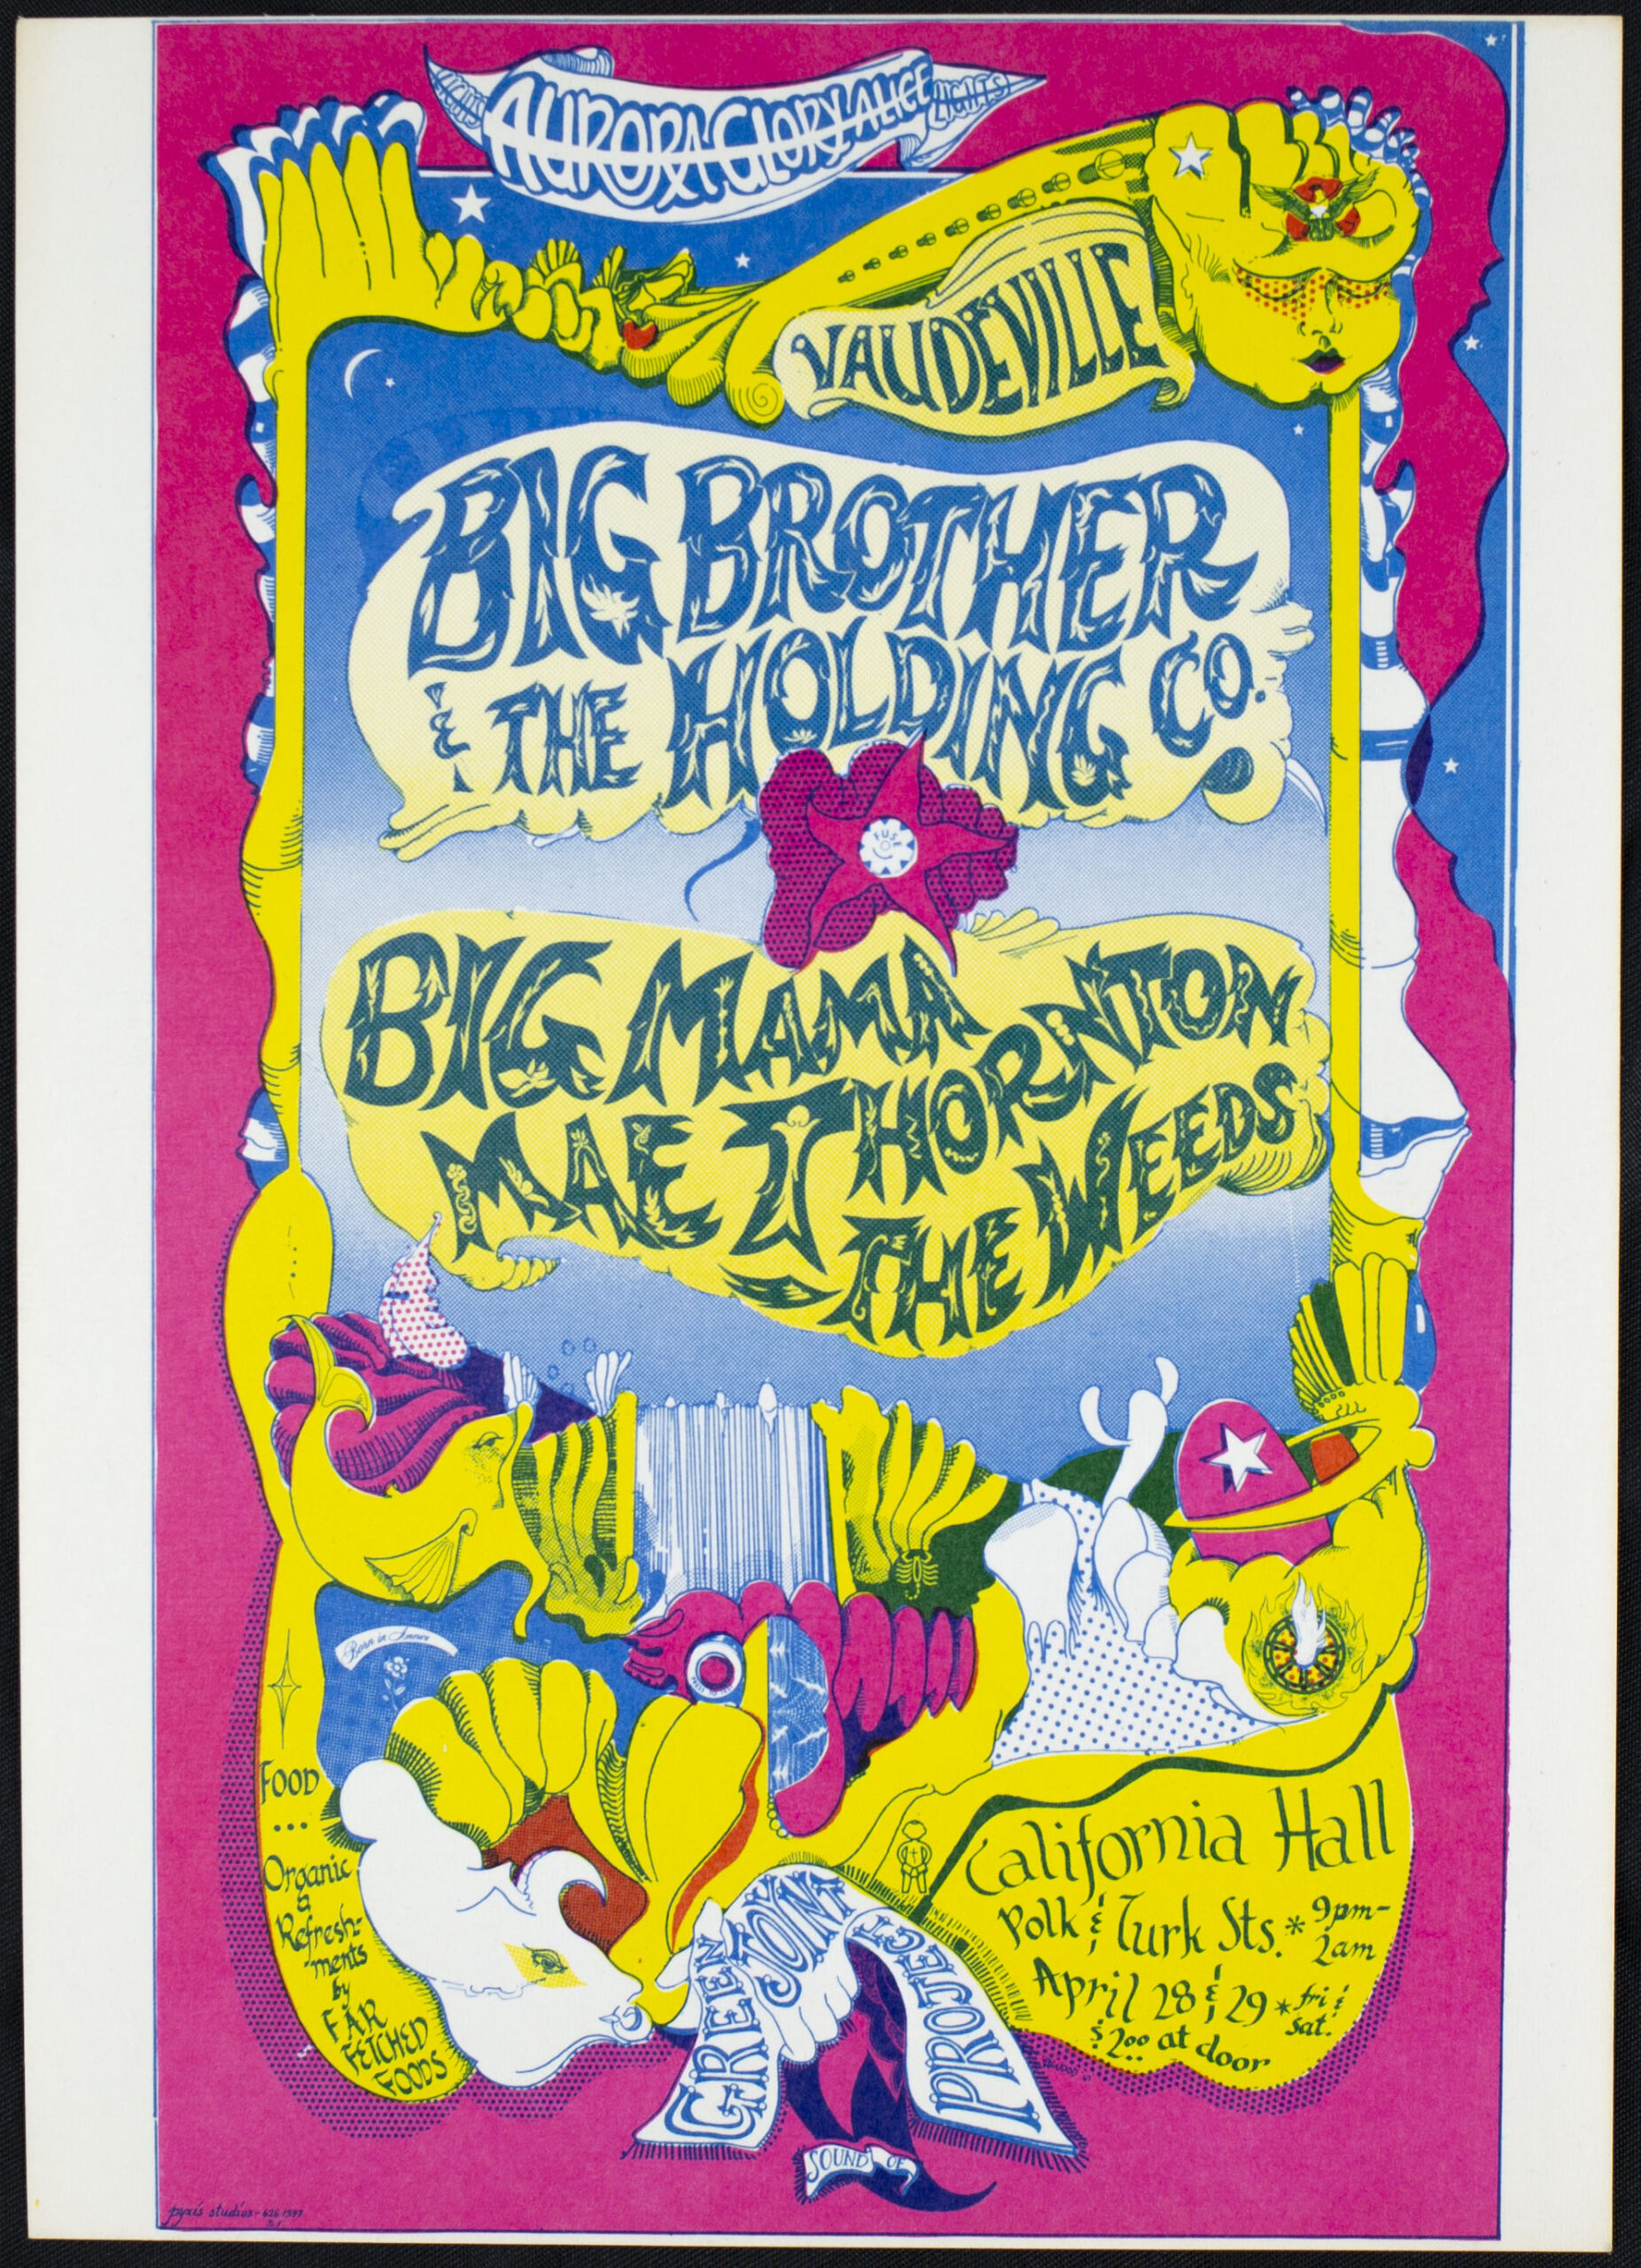 Big Brother and the Holding Company [Handbill]